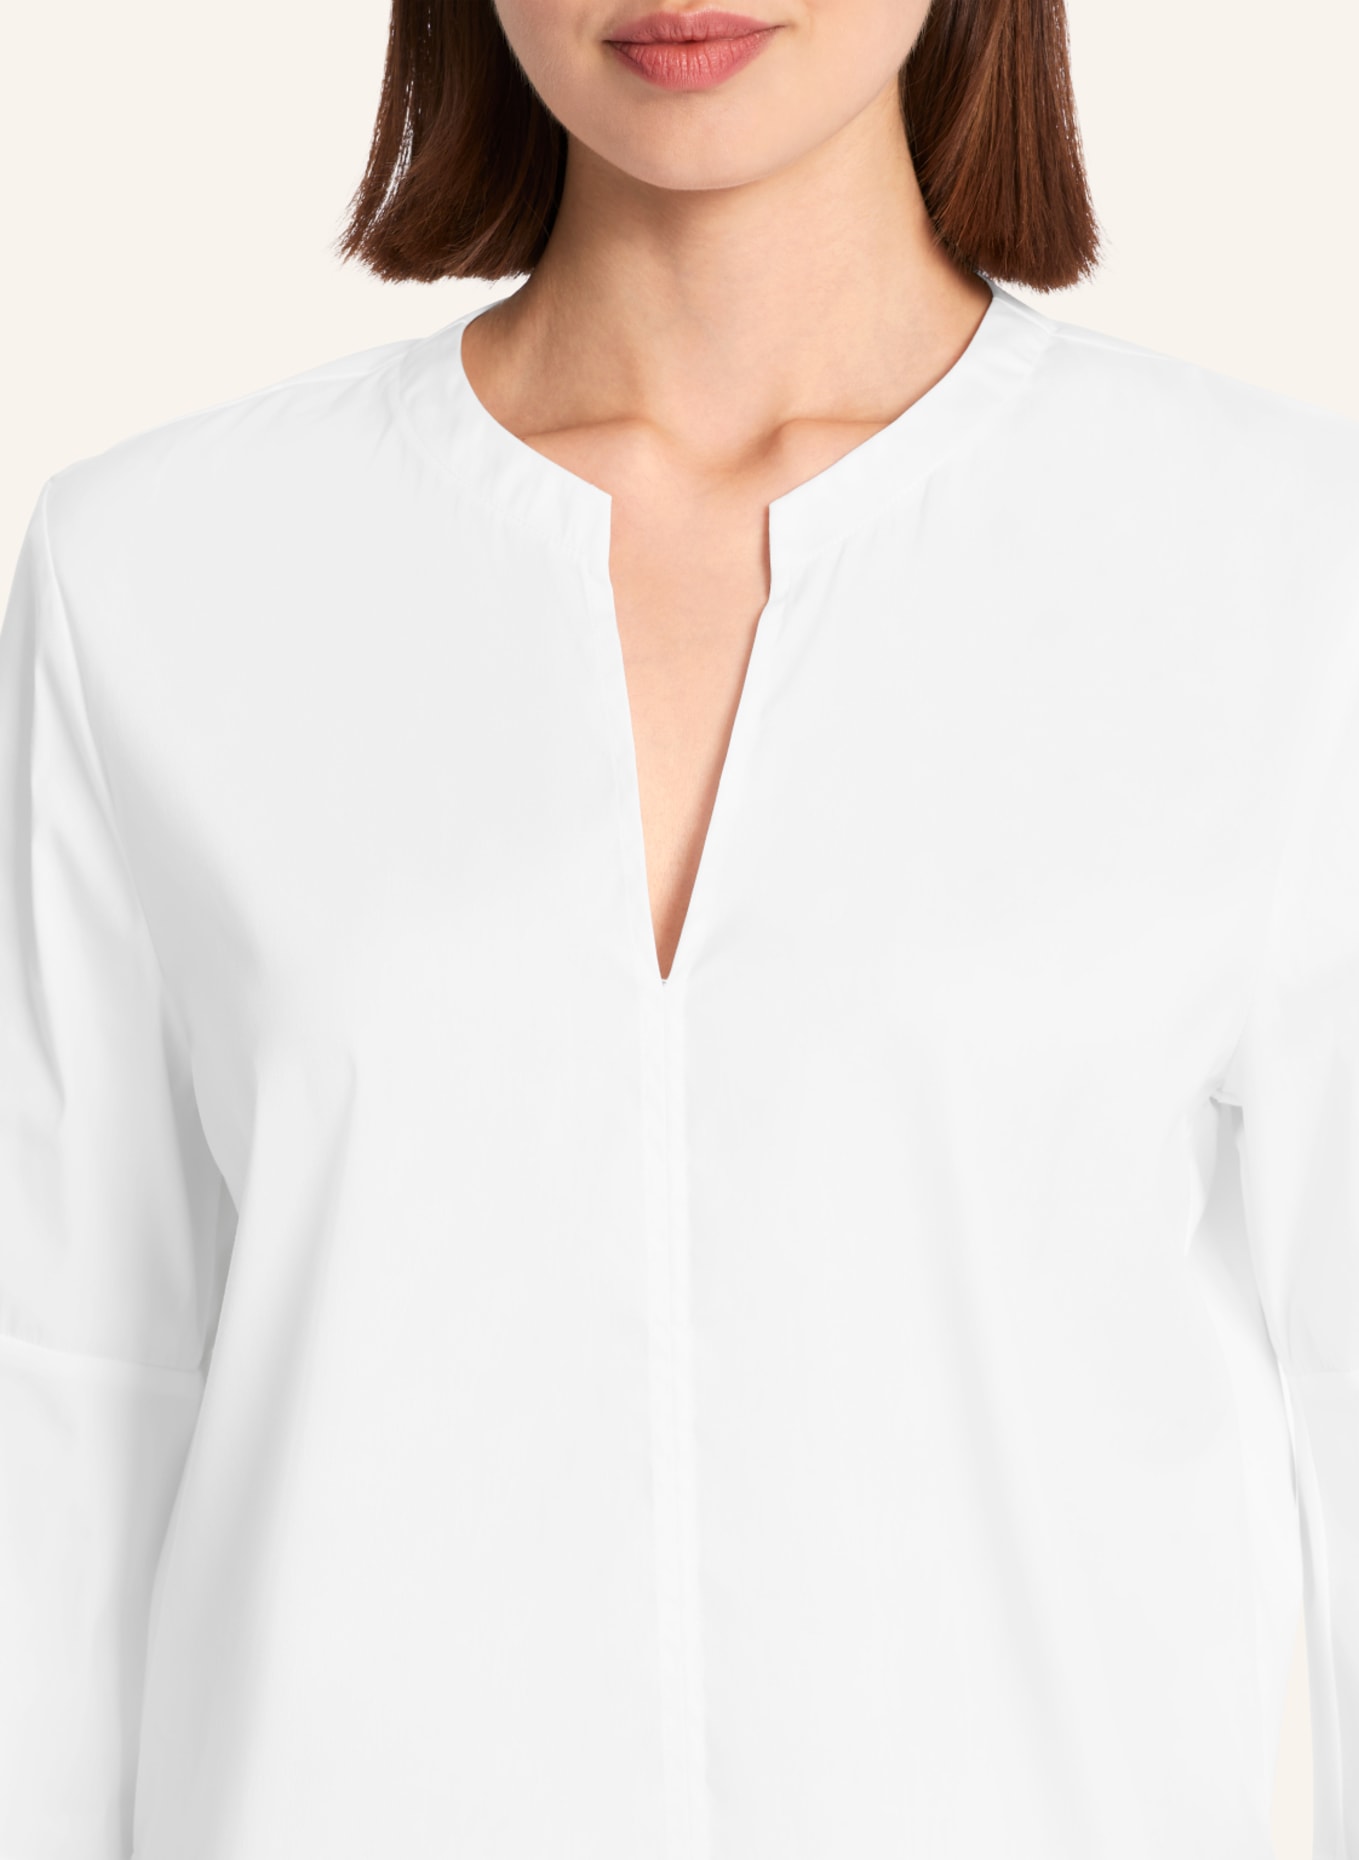 MARC CAIN Bluse, Farbe: WEISS (Bild 3)